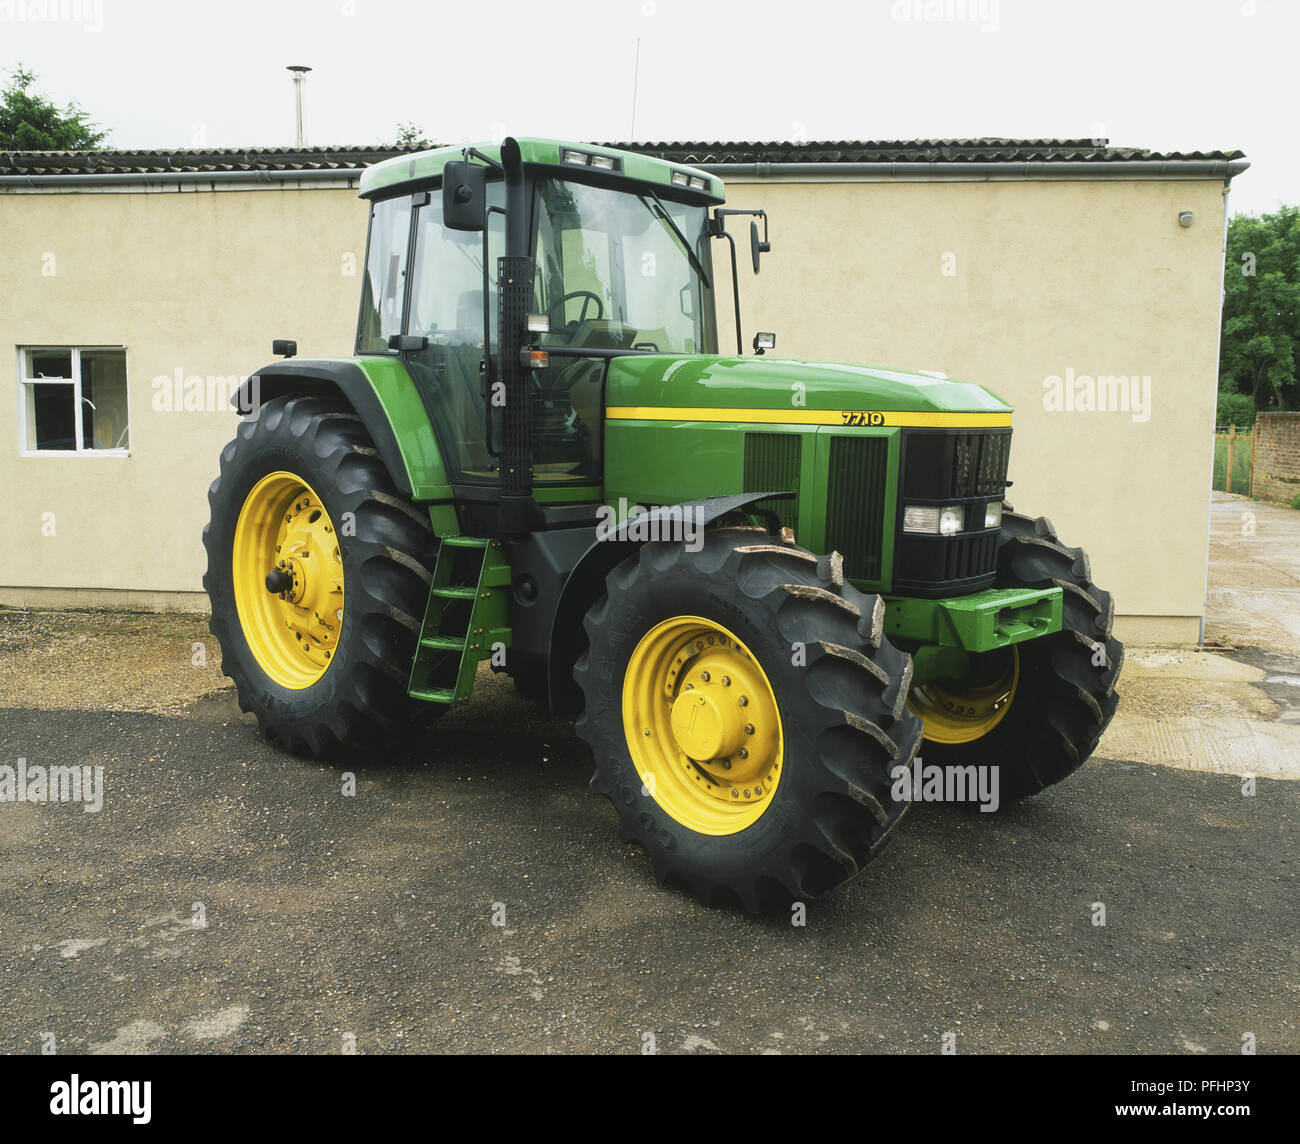 A green and yellow tractor parked outside a low building Stock Photo